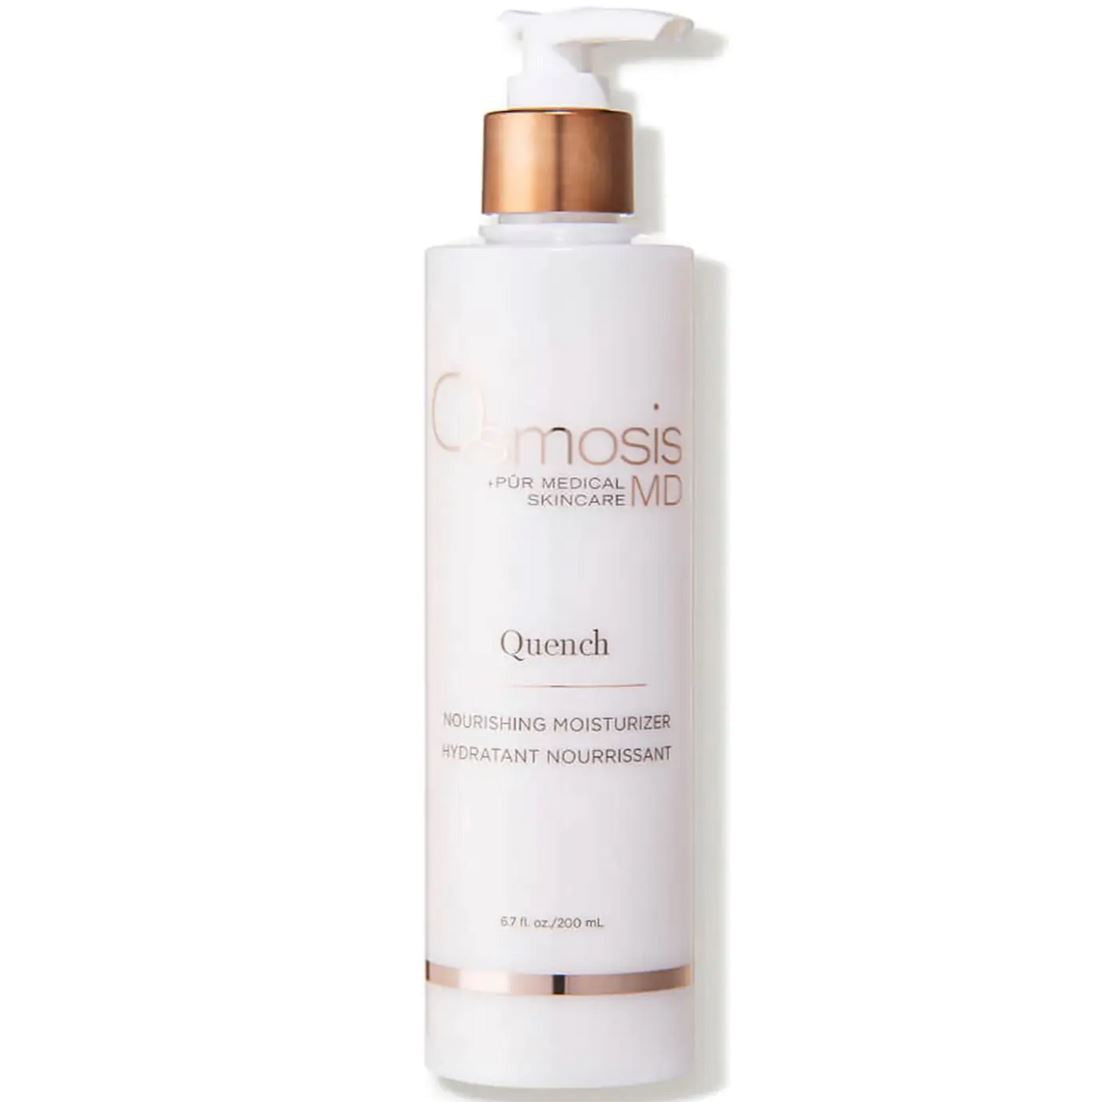 Osmosis Quench Nourishing Moisturizer Osmosis Beauty 6.7 fl. oz. Shop at Exclusive Beauty Club